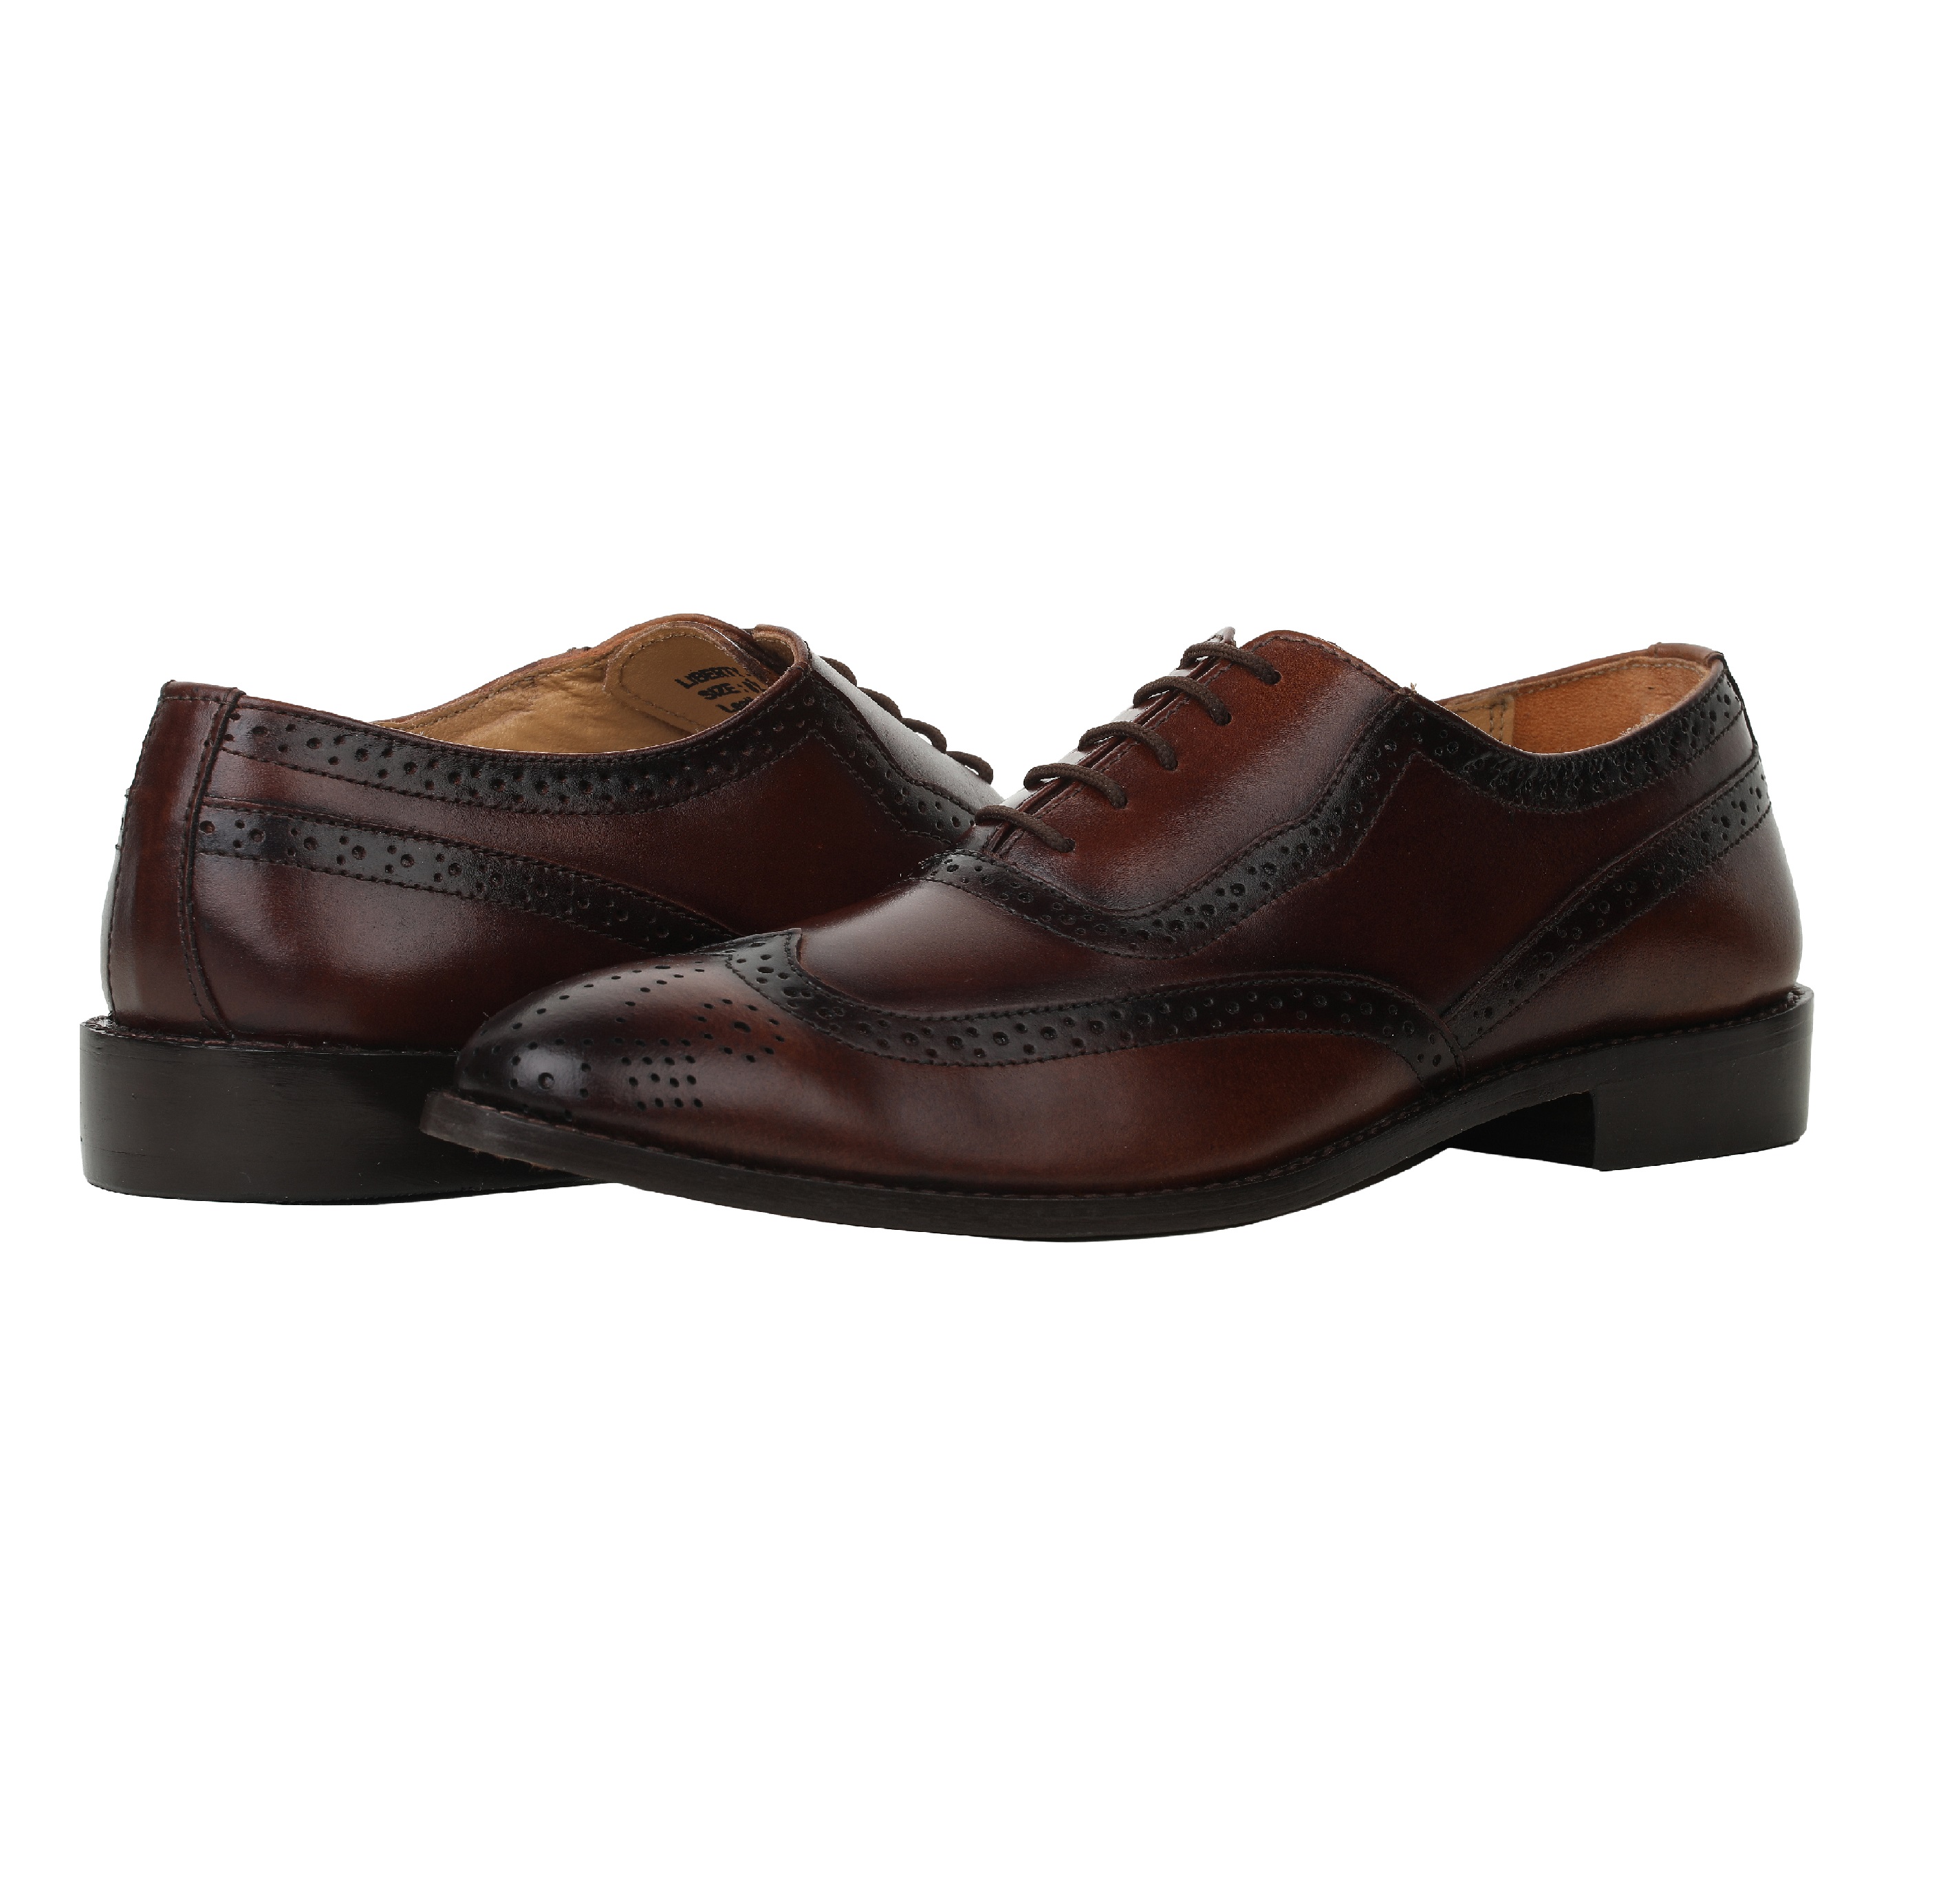 Wing Tip Lace Up Oxford Dress Shoes 